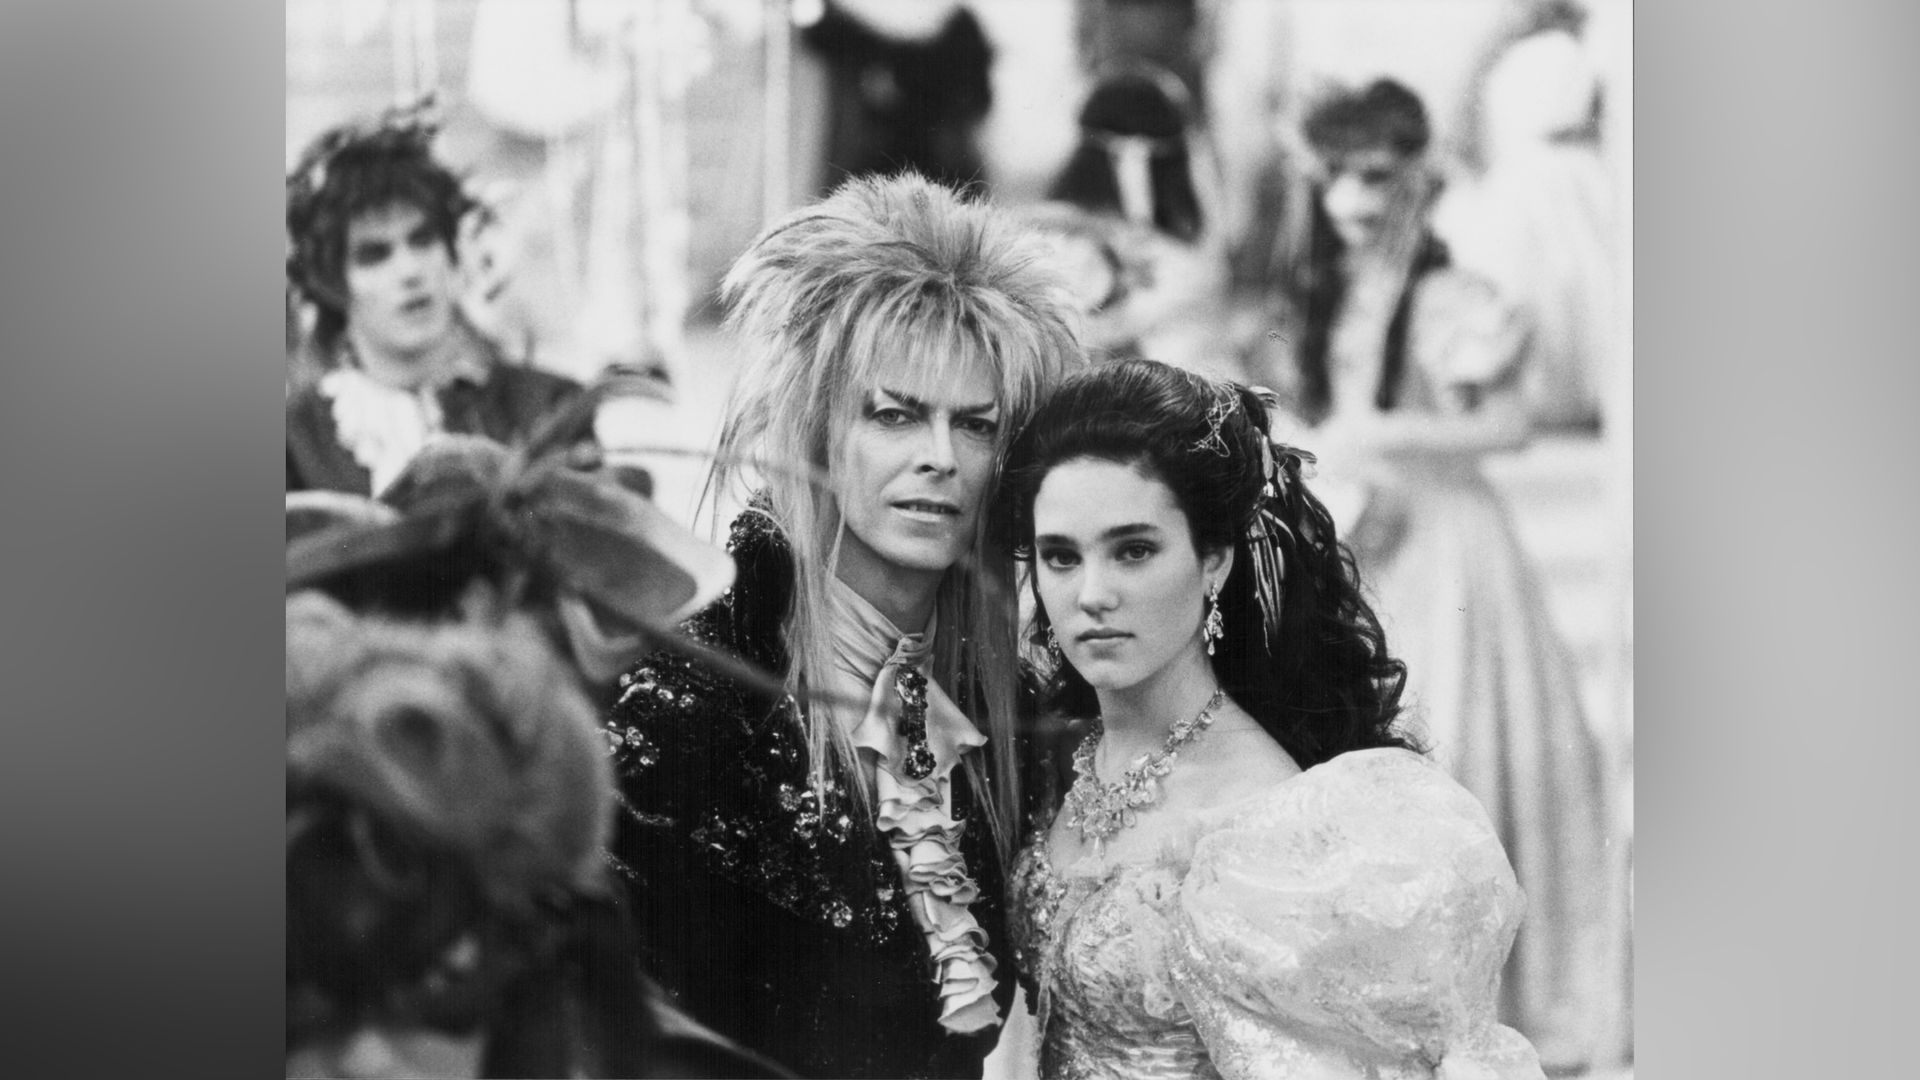 Jennifer Connelly and David Bowie on the set of the movie Labyrinth